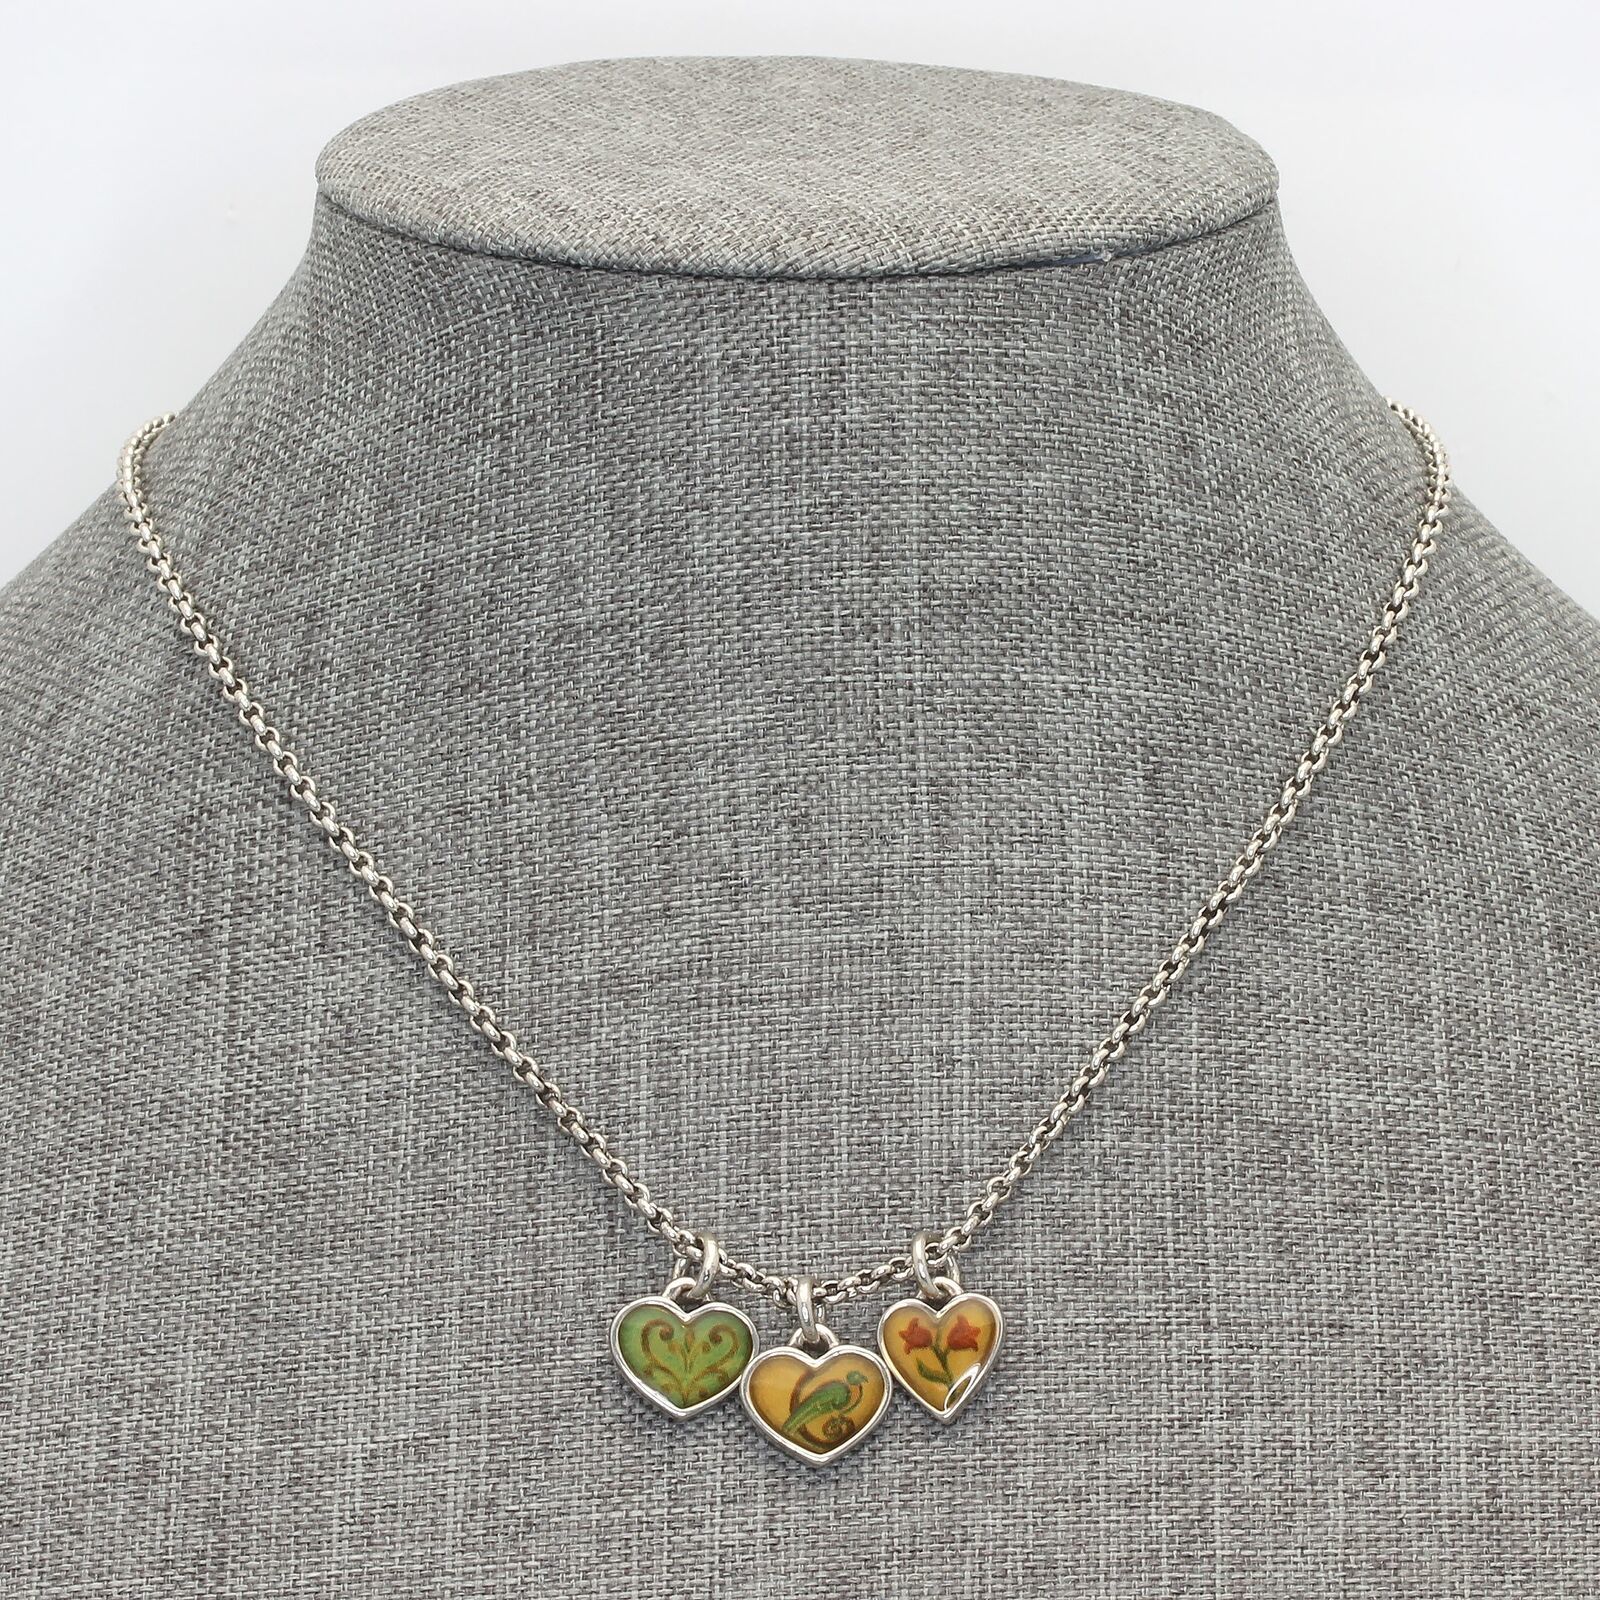 Brighton Piccadilly Heart Charm Necklace Love Passion Gratitude & Embrace Life  - $24.95